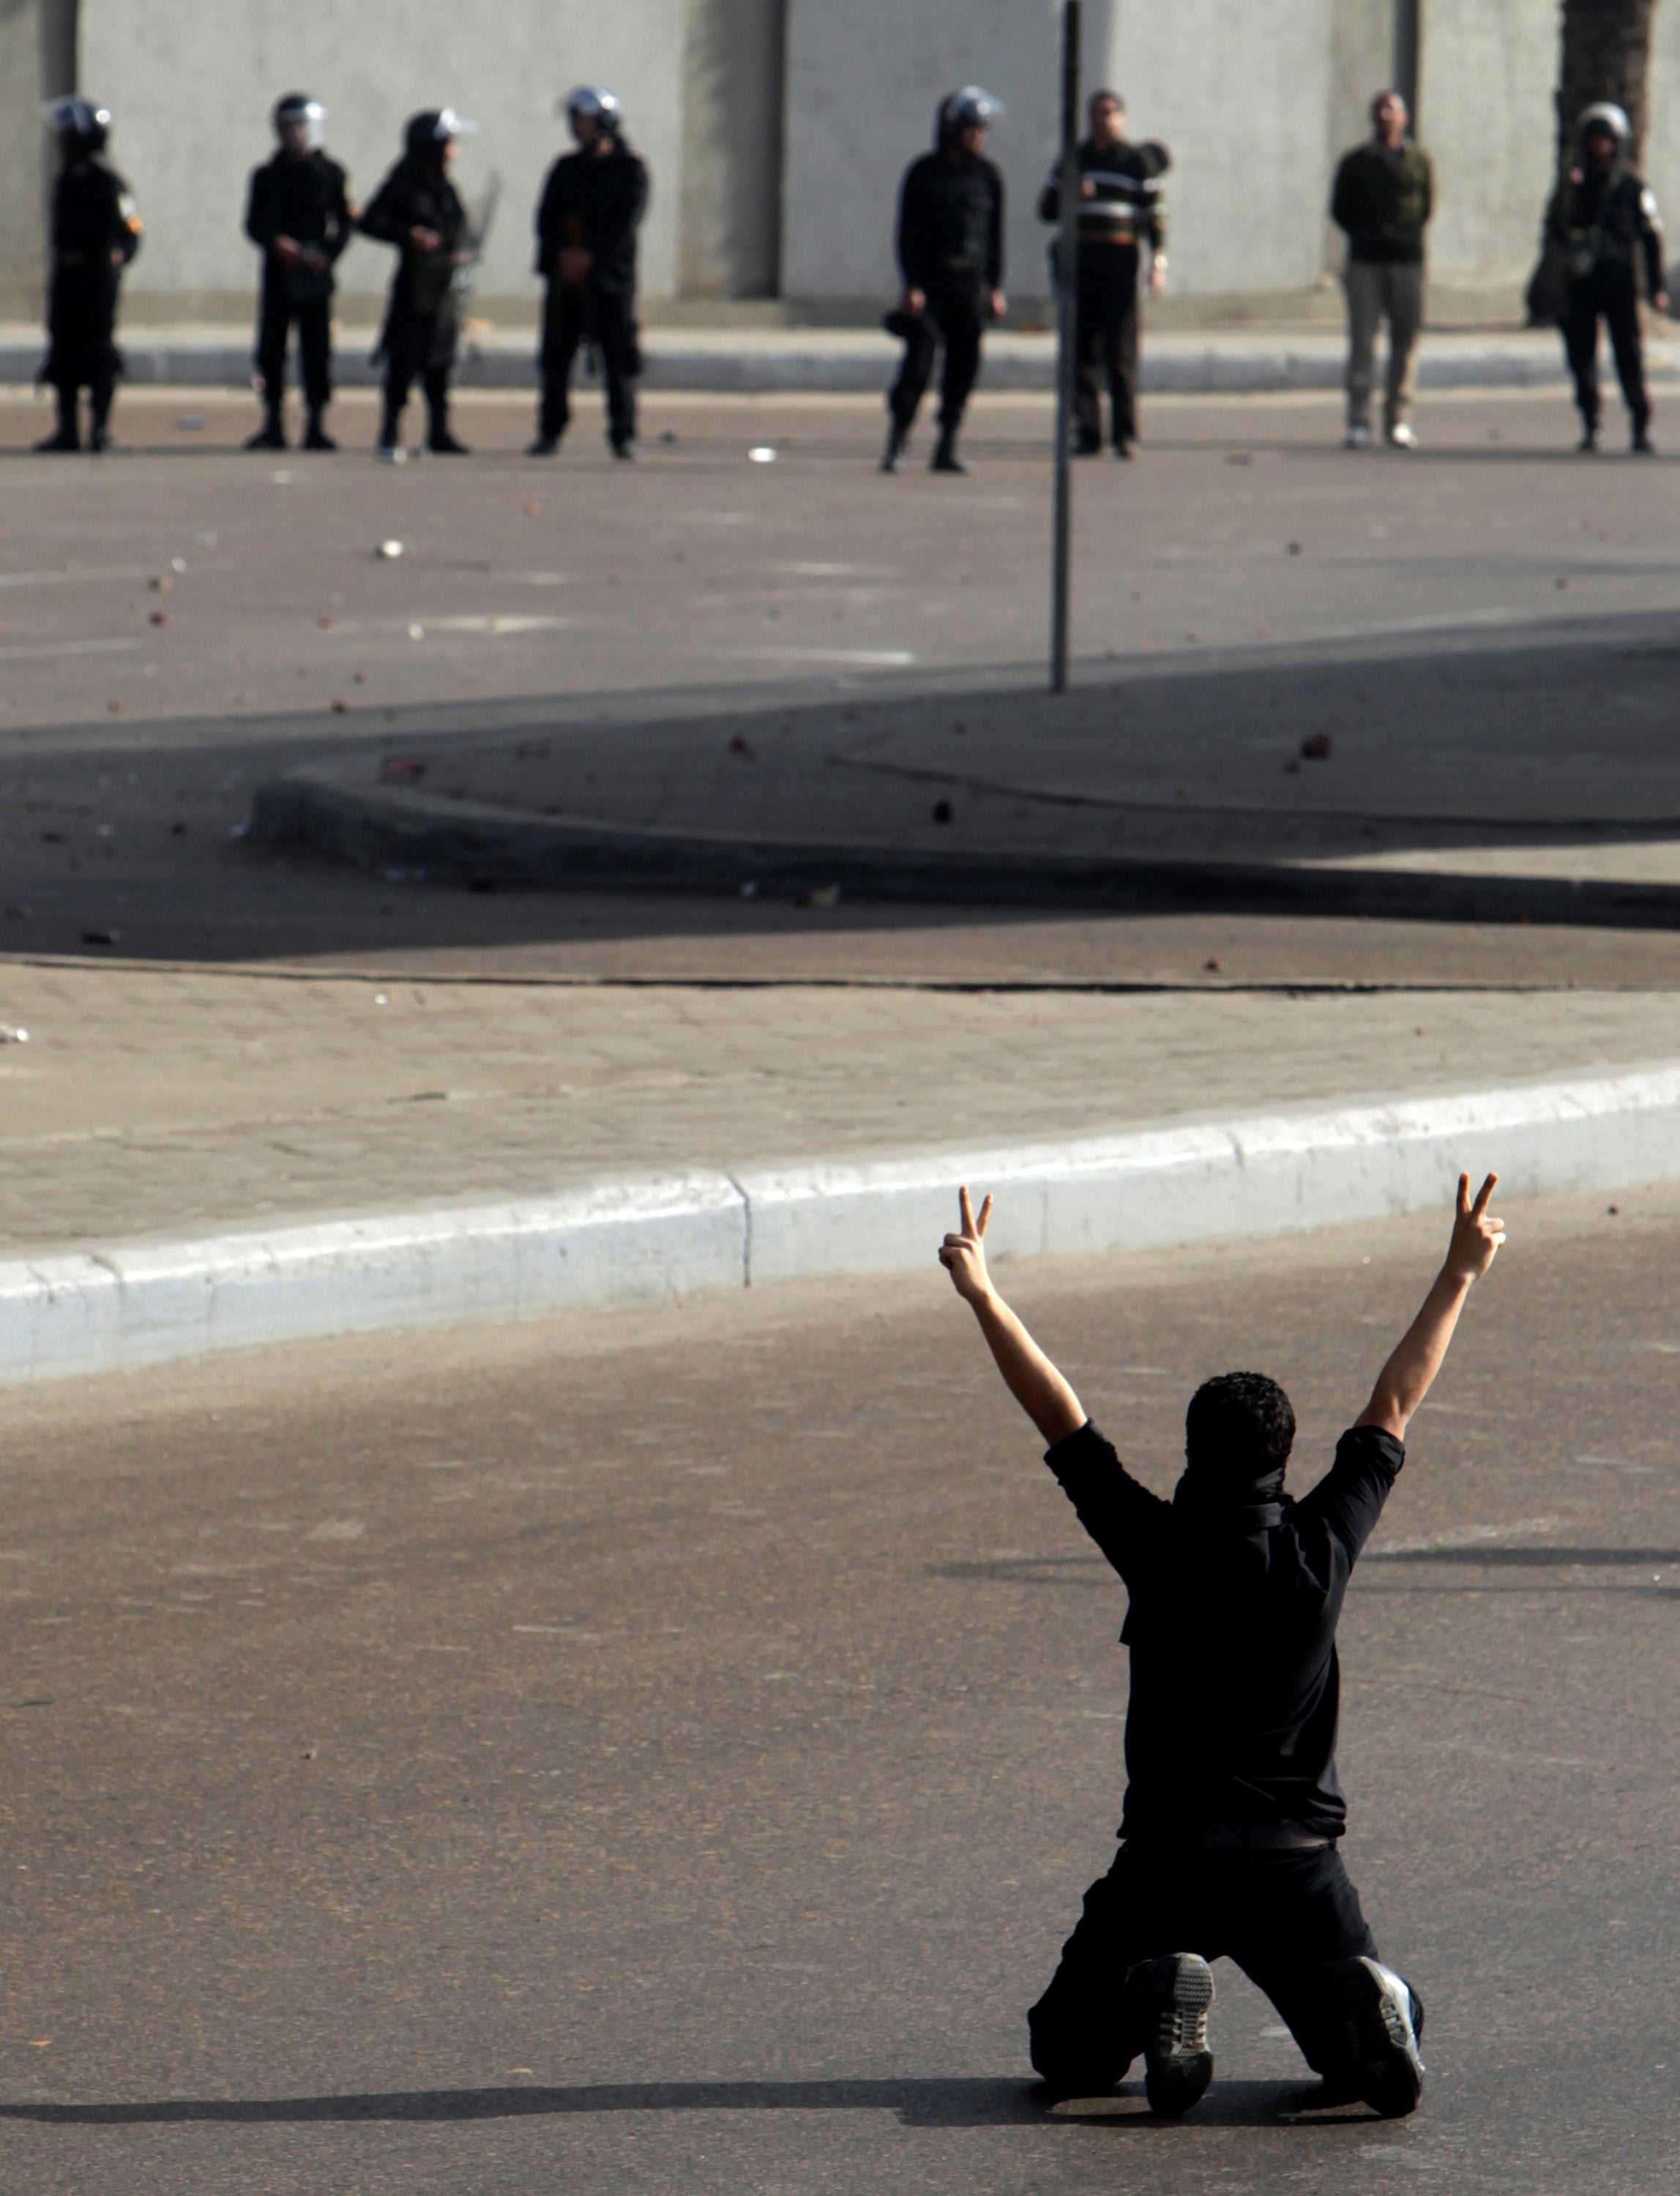 A protester flashes a victory sign in front of police during clashes in Cairo in January 2011